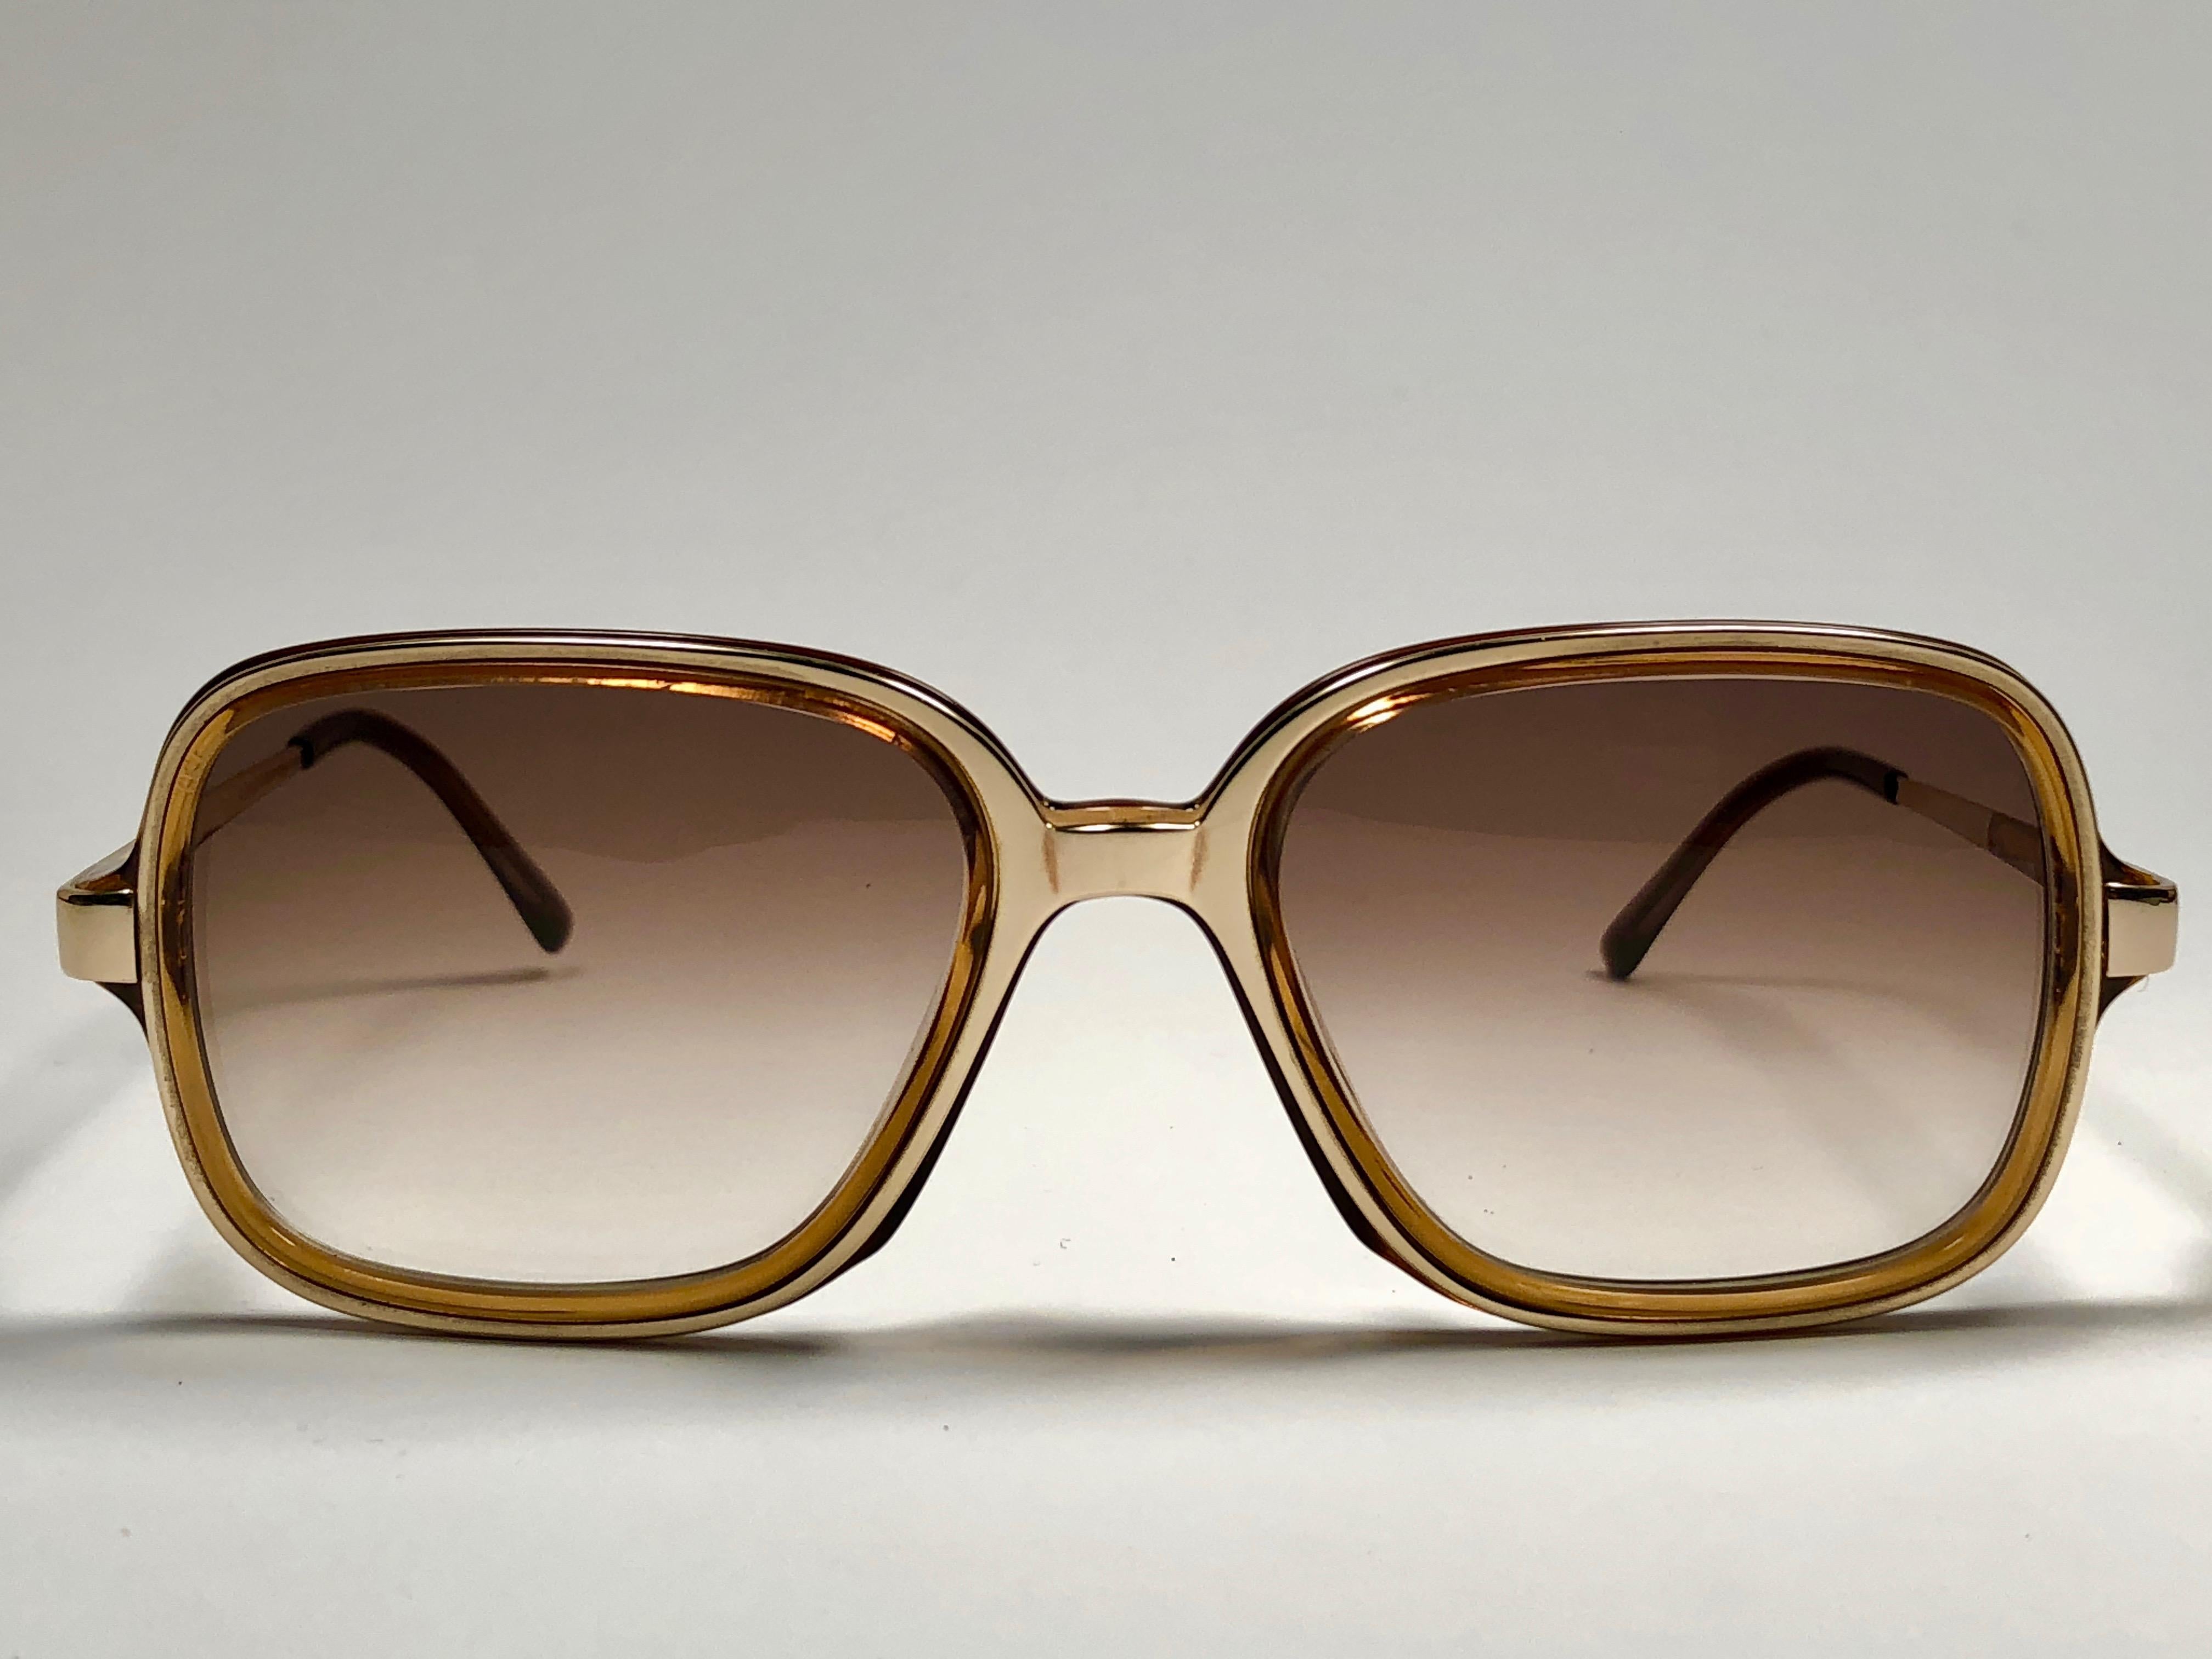 New vintage Christian Dior Monsieur gold & amber details frame.

Spotless brown gradient lenses.

Comes with it original CD Monsieur sleeve.

New, never worn or displayed this item may show light sign of wear due to storage.

Made in Austria